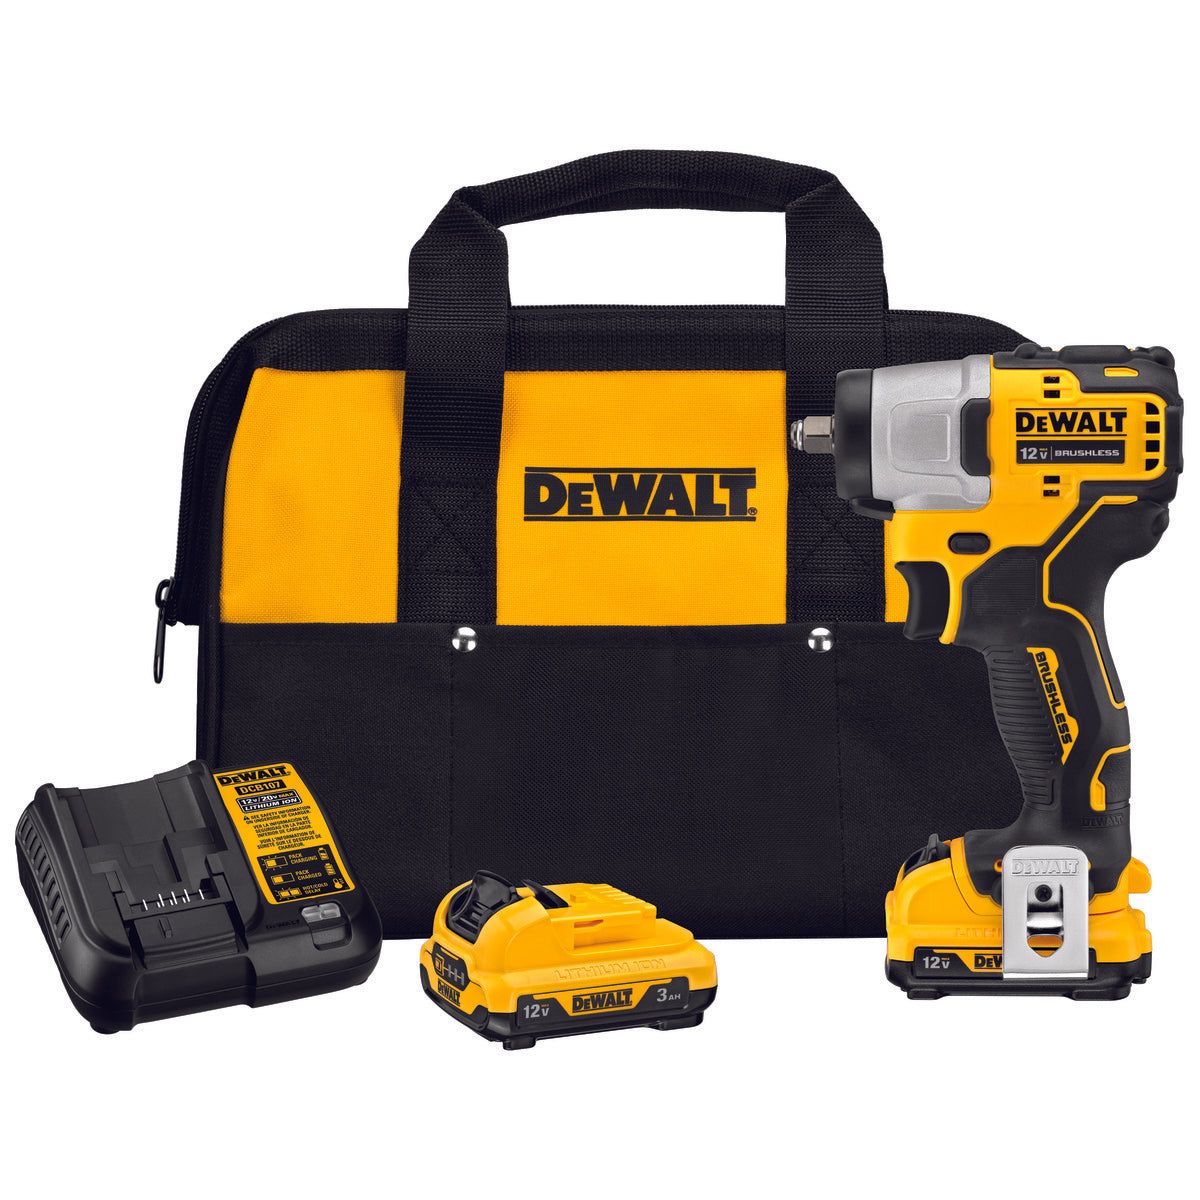 DEWALT DCF902F2 - XTREME™ 12V MAX* BRUSHLESS 3/8 IN. CORDLESS IMPACT WRENCH KIT - wise-line-tools